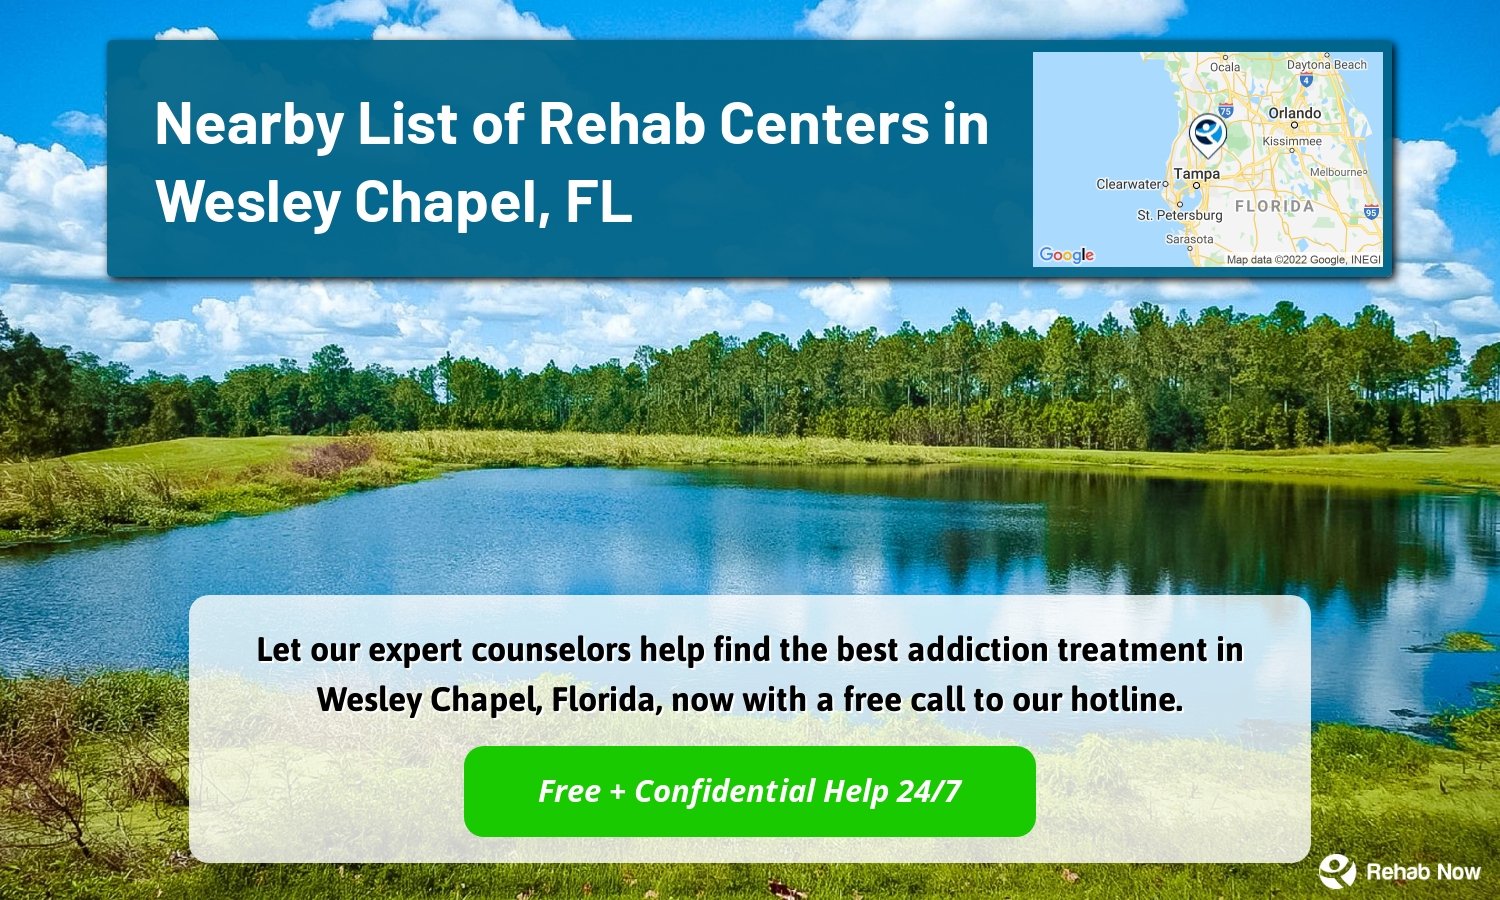 Let our expert counselors help find the best addiction treatment in Wesley Chapel, Florida, now with a free call to our hotline.